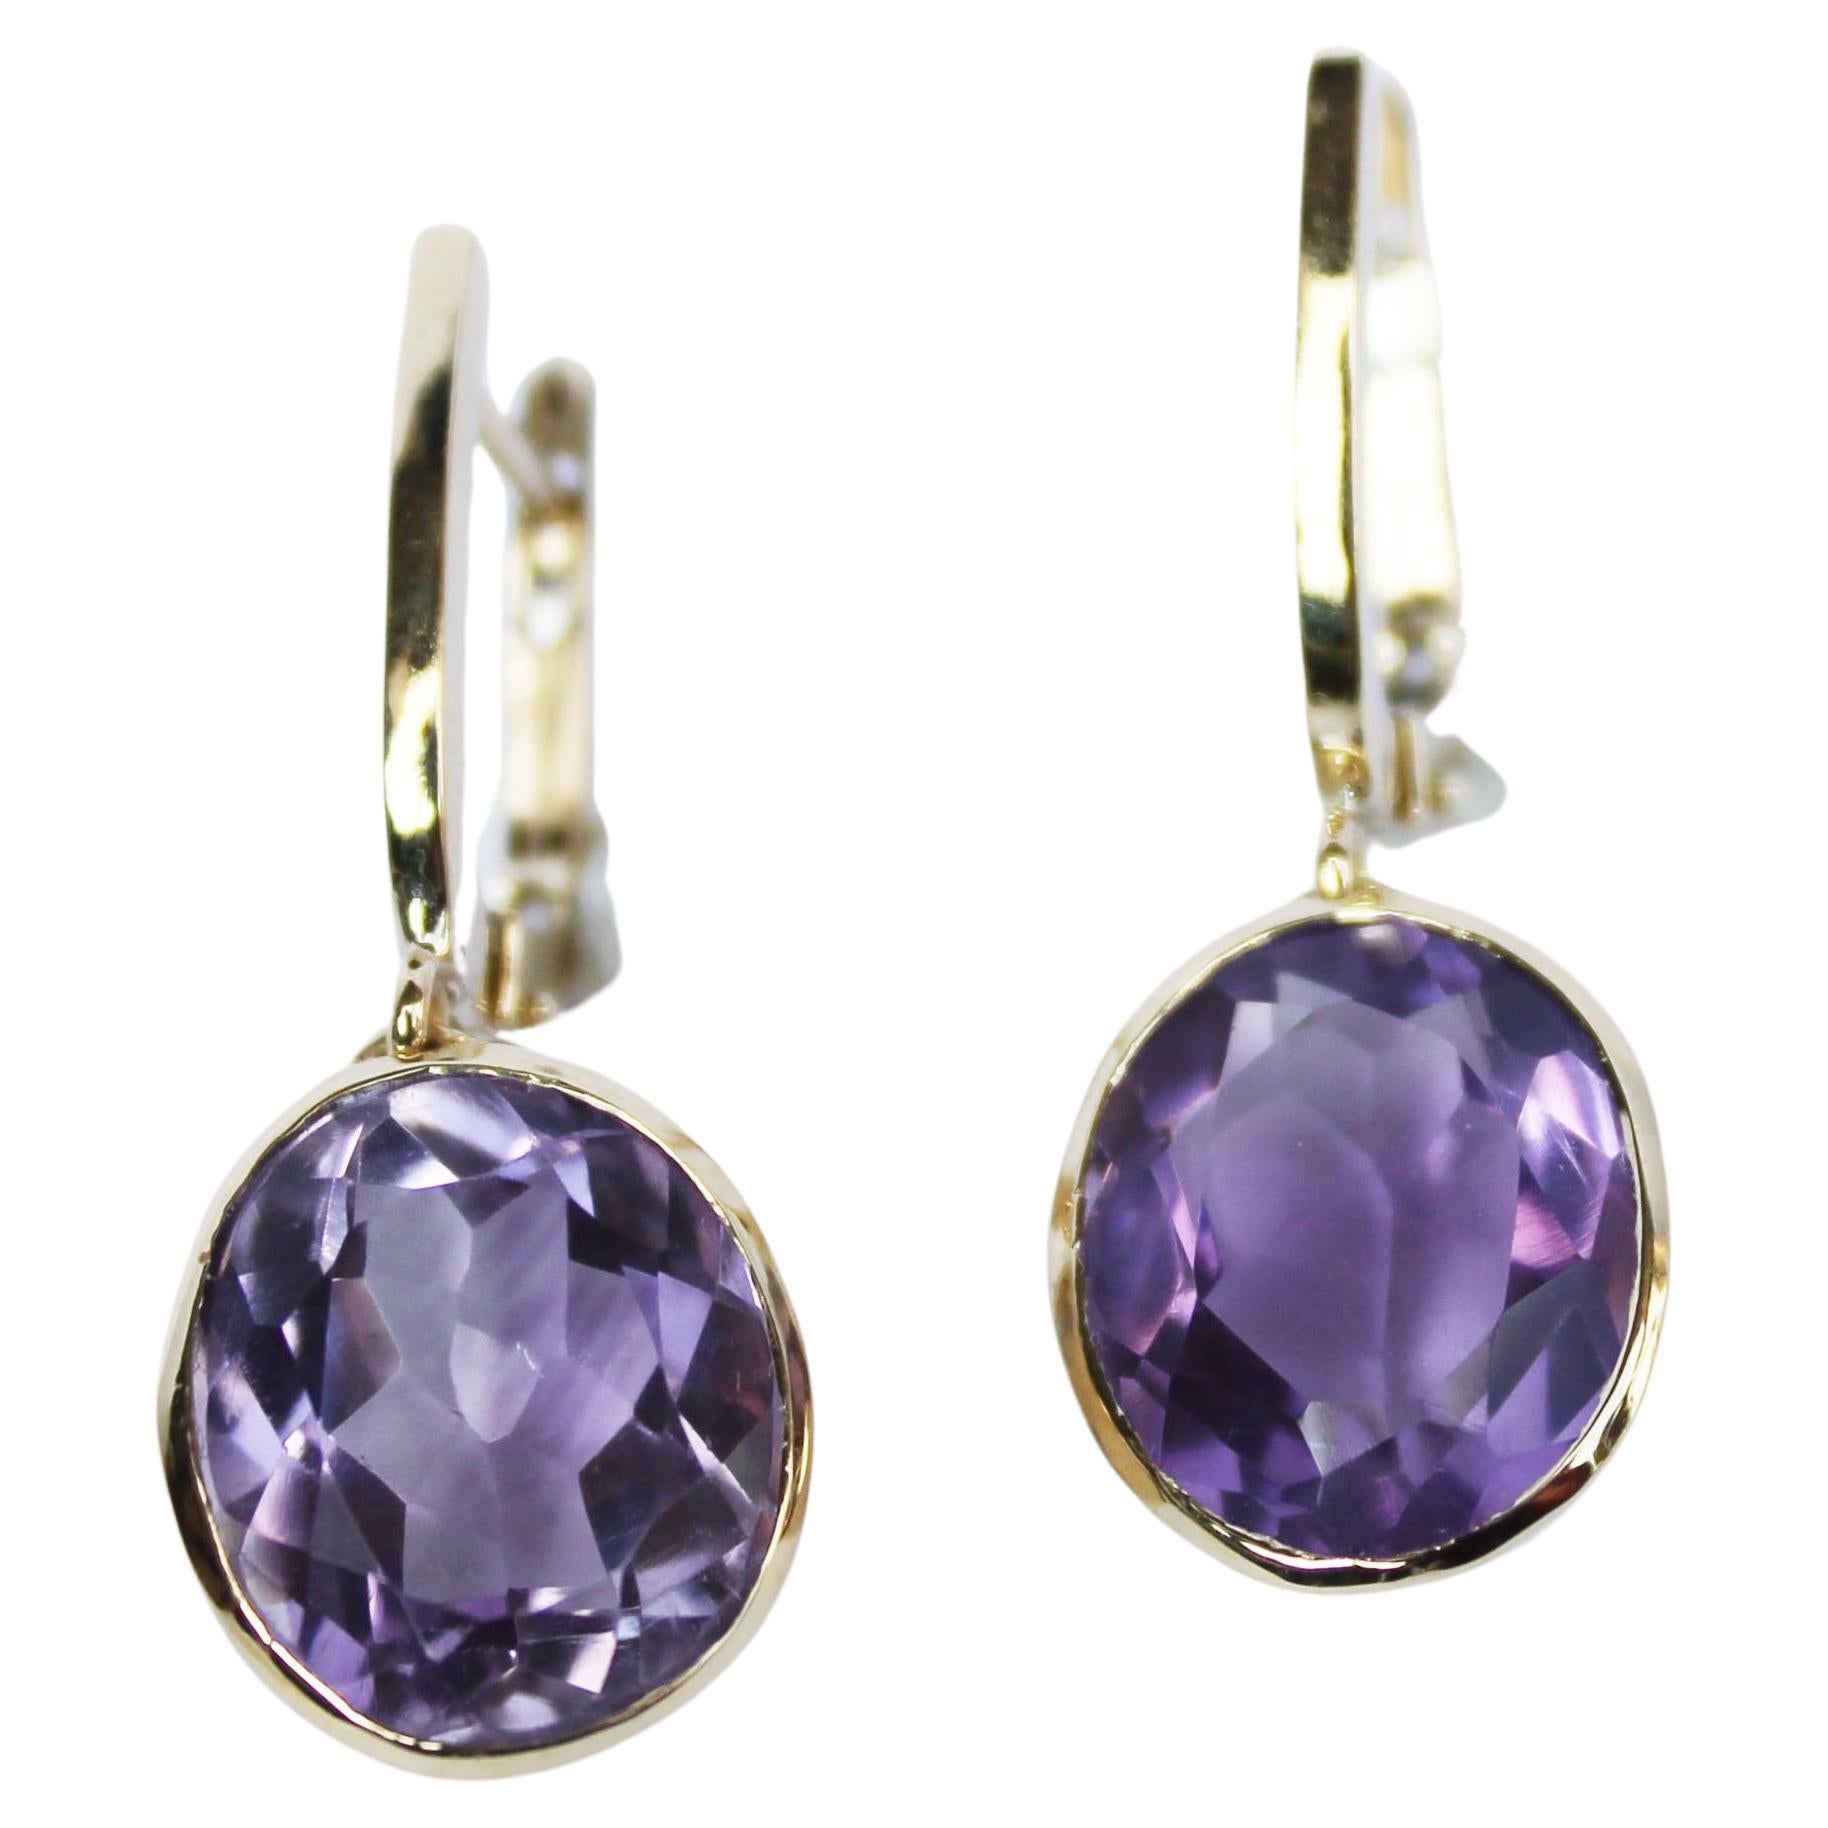 Earrings in yellow gold 18 Karat with Amethyst (oval cut, size: 10x12 mm)

All Stanoppi Jewelry is new and has never been previously owned or worn. Each item will arrive at your door beautifully gift wrapped in Stanoppi boxes, put inside an elegant